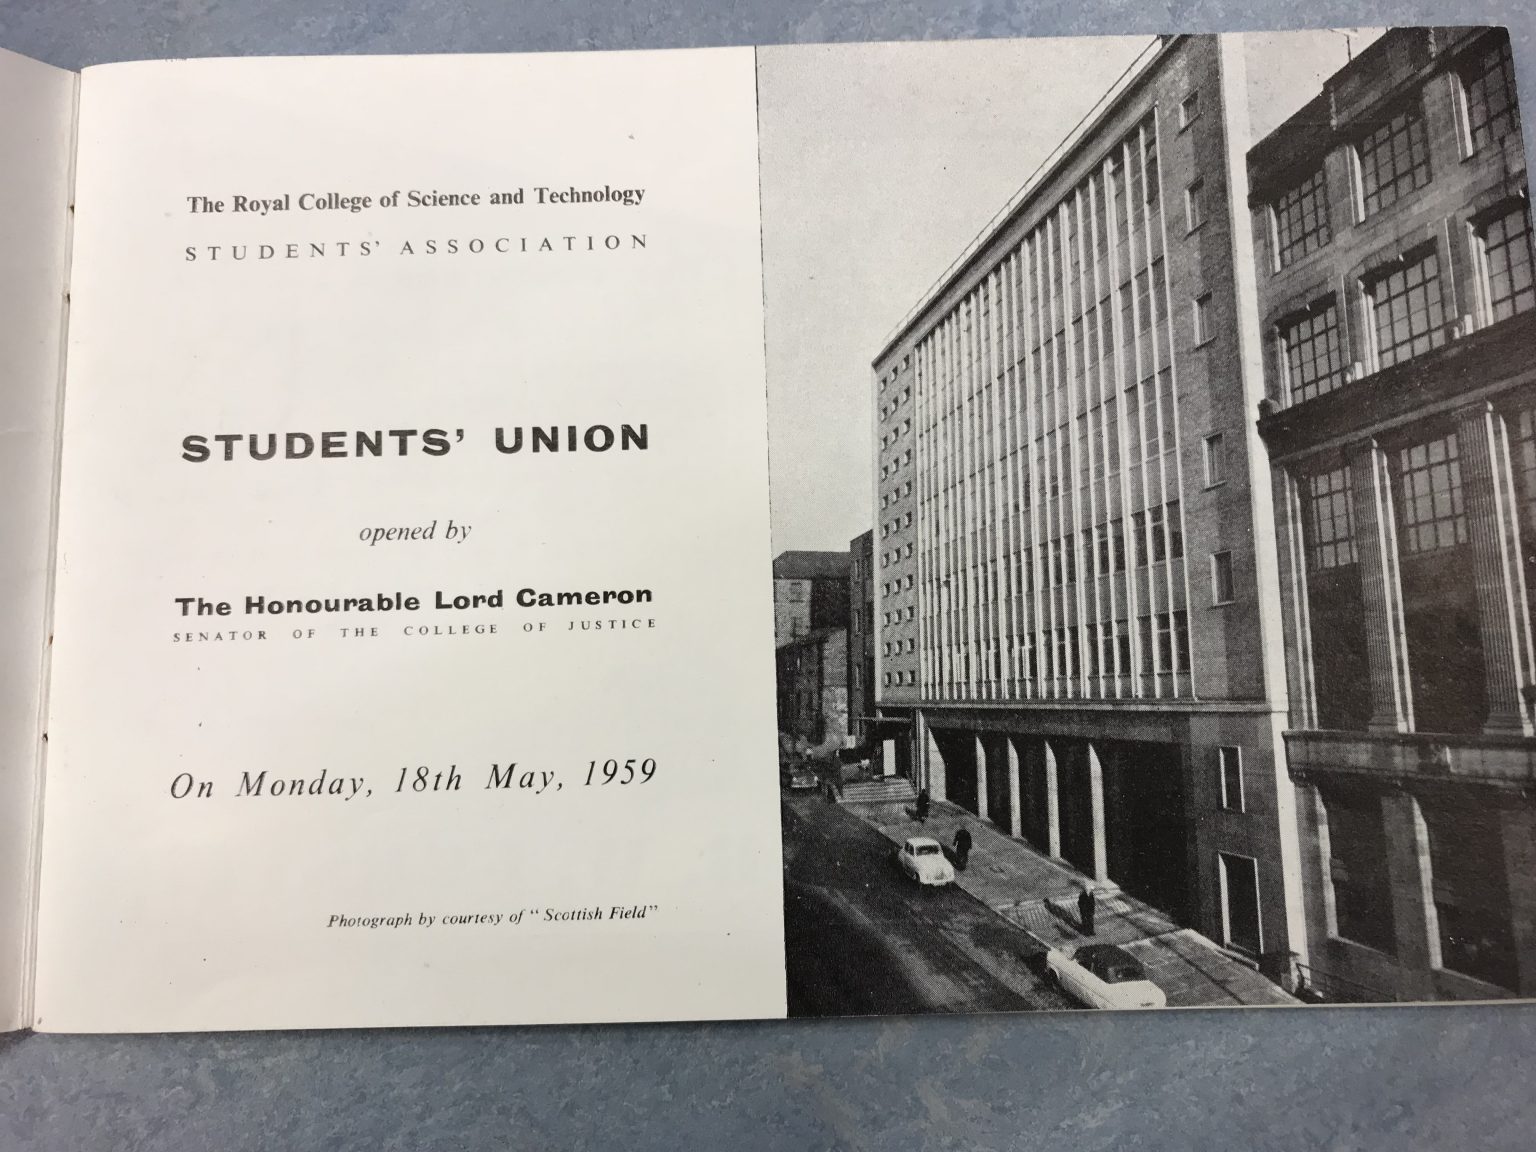 A photograph of an aged printed booklet that reads 'Students' Union opened by The Honourable Lord Cameron on Monday 18 May 1959